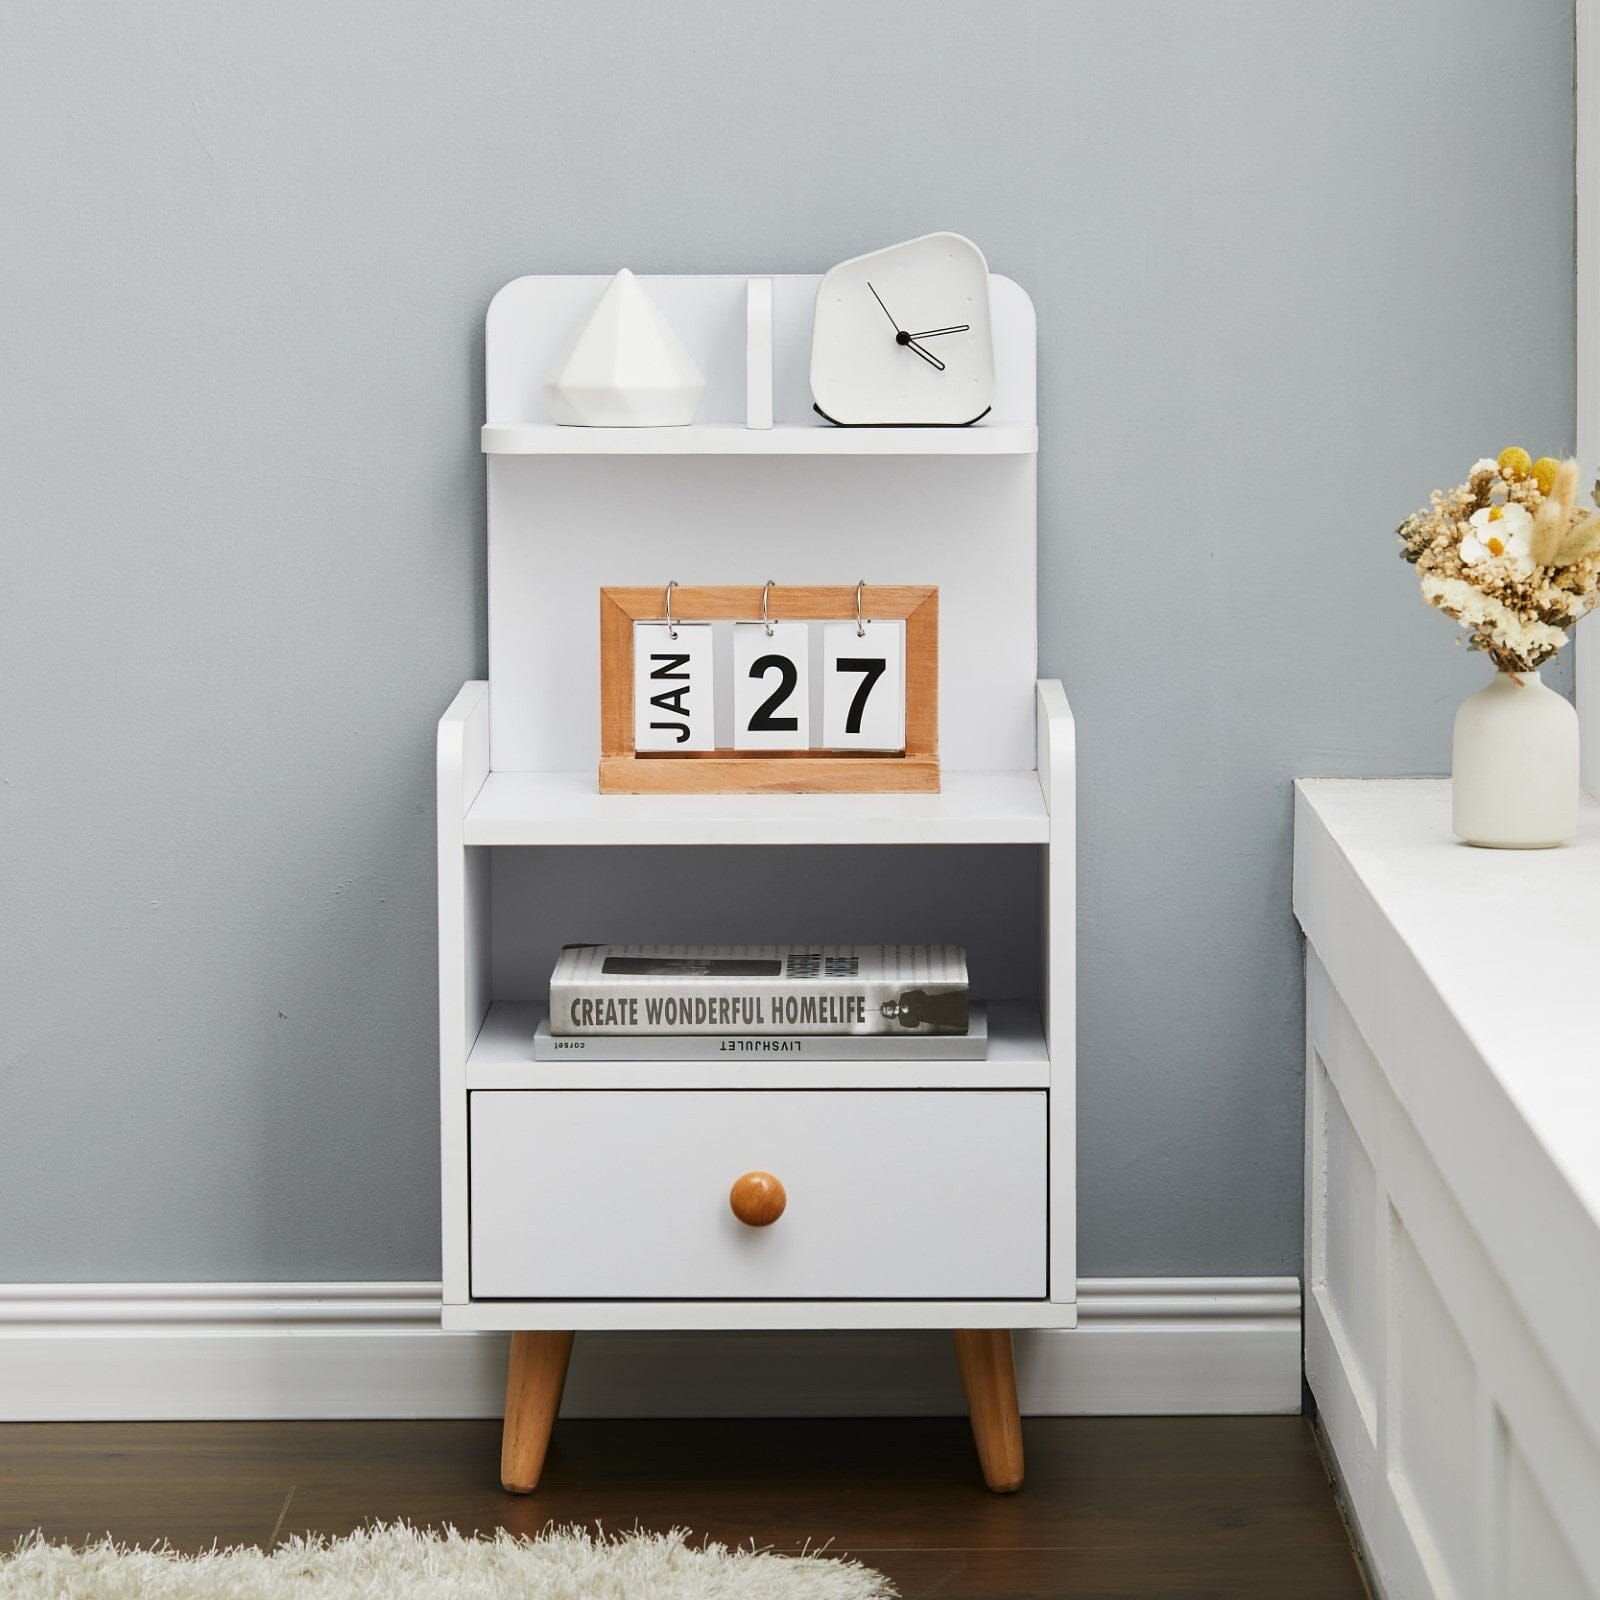 White Wooden Bedside Table with Wooden Legs and Drawers Cabinets Living and Home 1 Drawer 